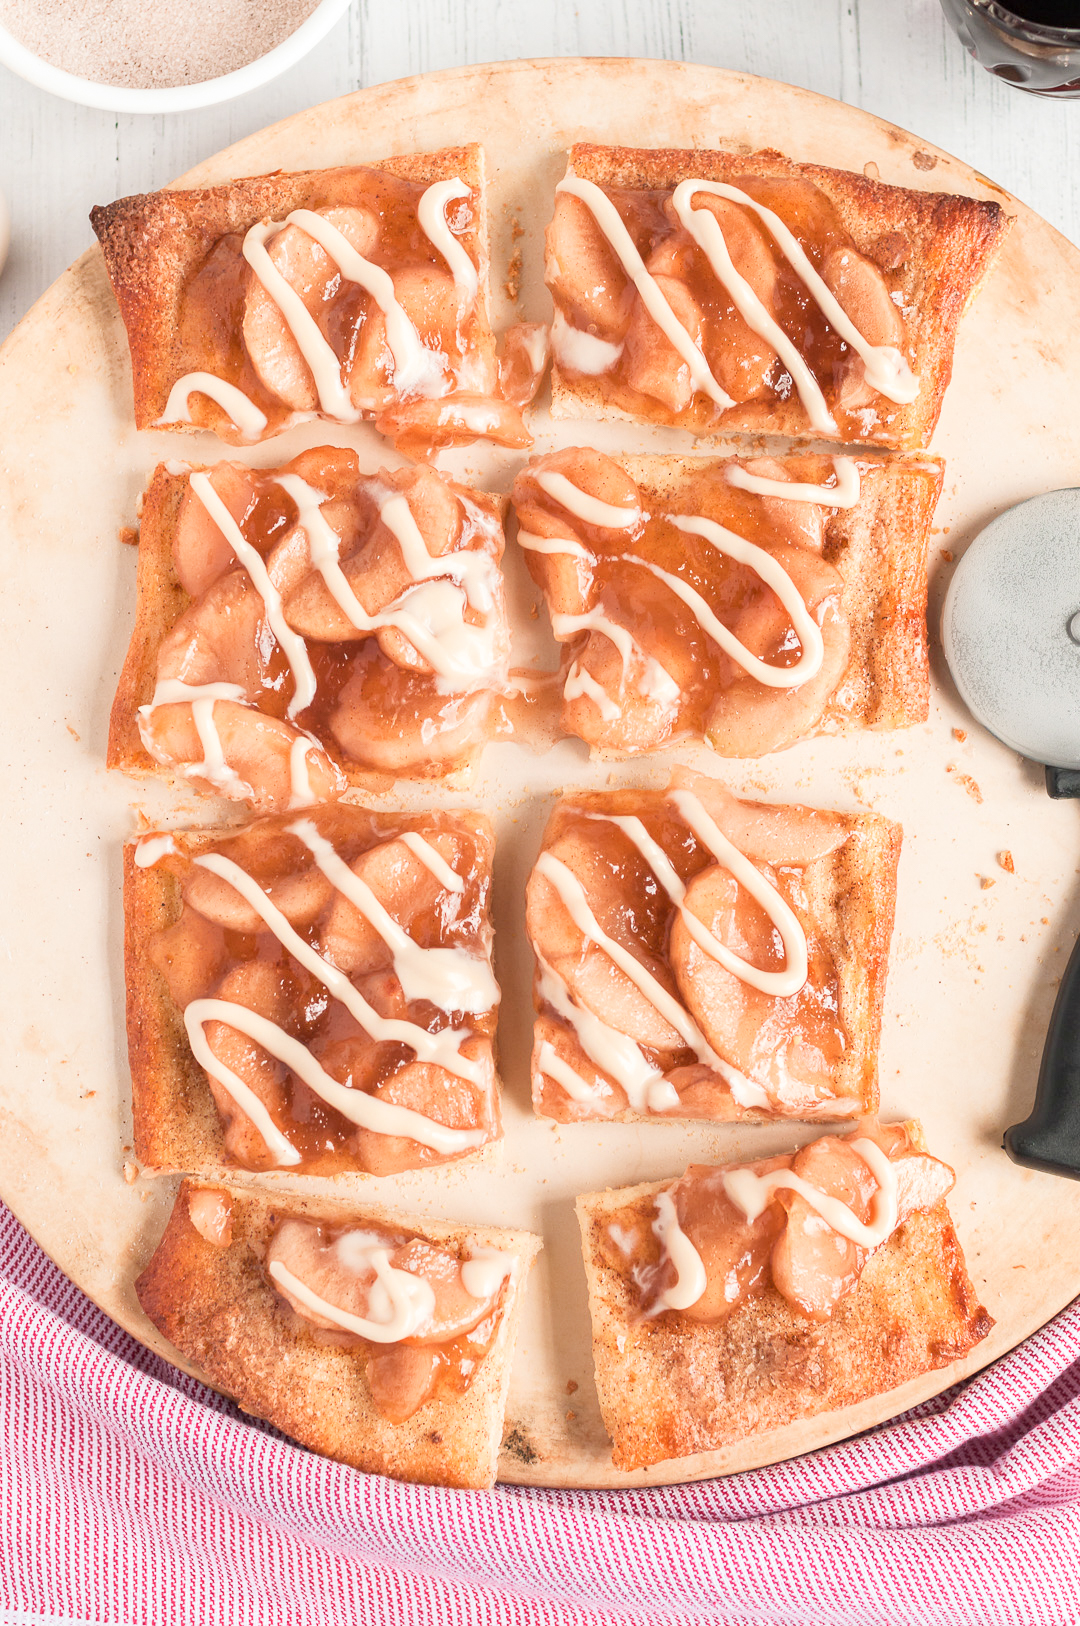 sliced apple pizza with icing